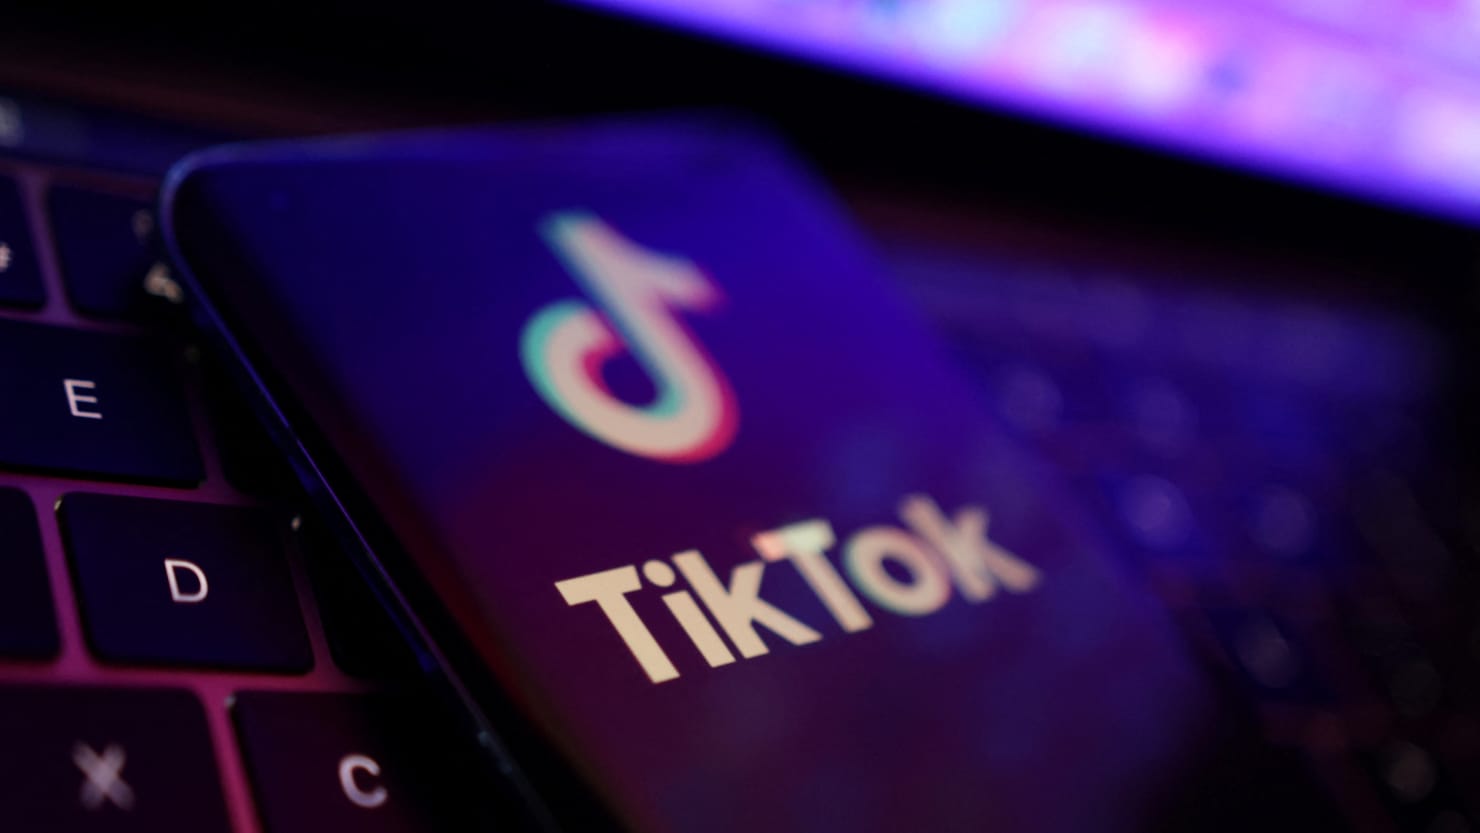 TikTok Takes to U.S. Courts to Have Nationwide Ban Scrapped